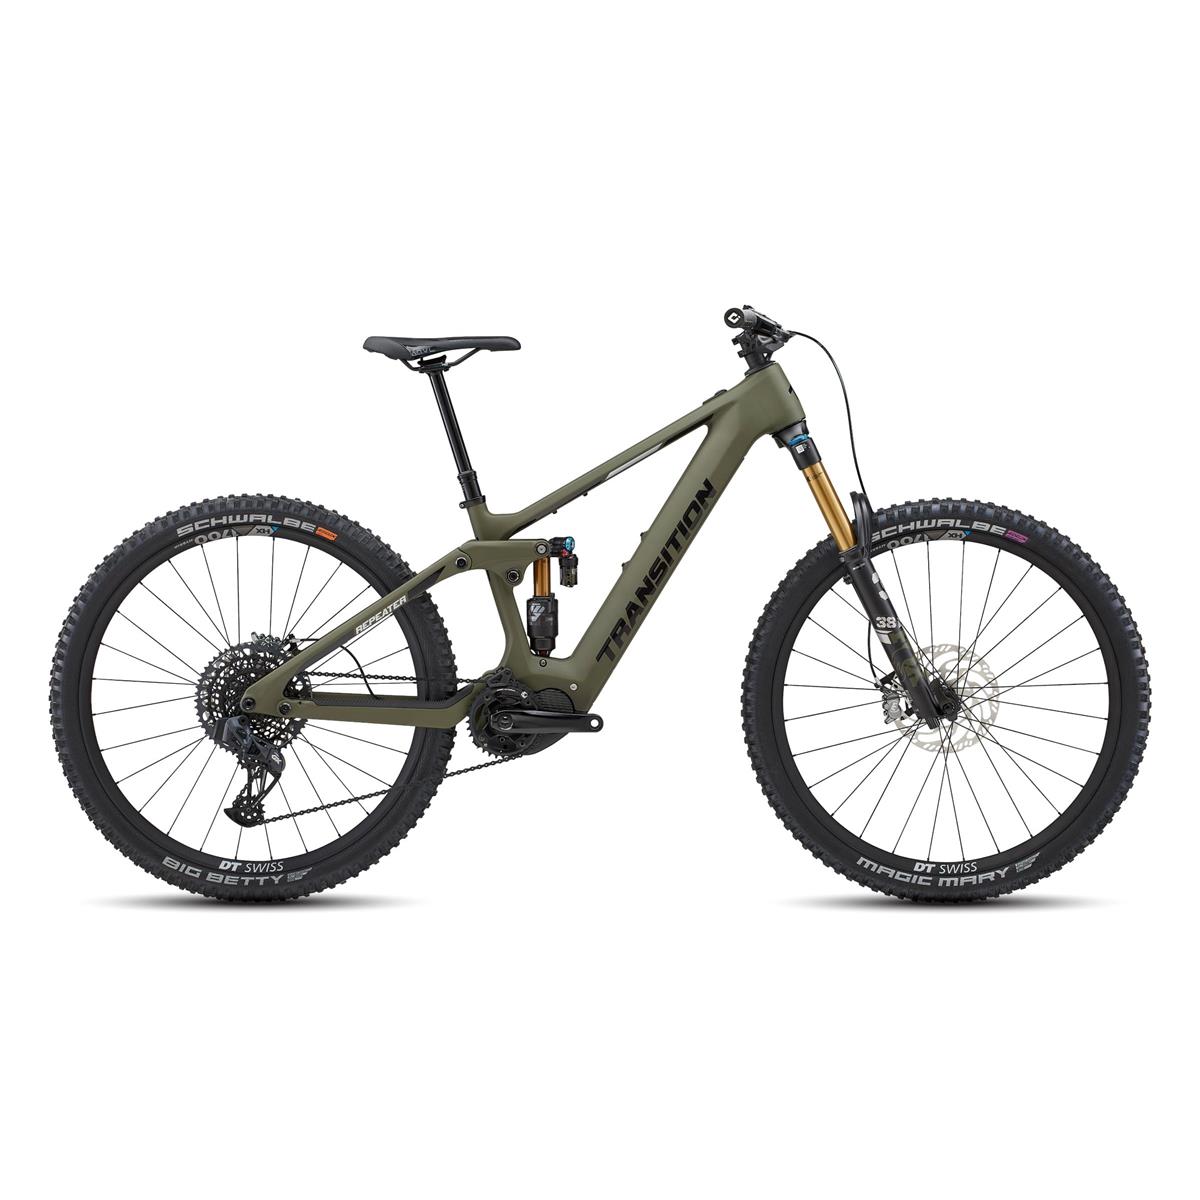 Repeater Carbon AXS 29'' 160mm 12v 630Wh Shimano EP8 Mossy Green 2022 Taglia S